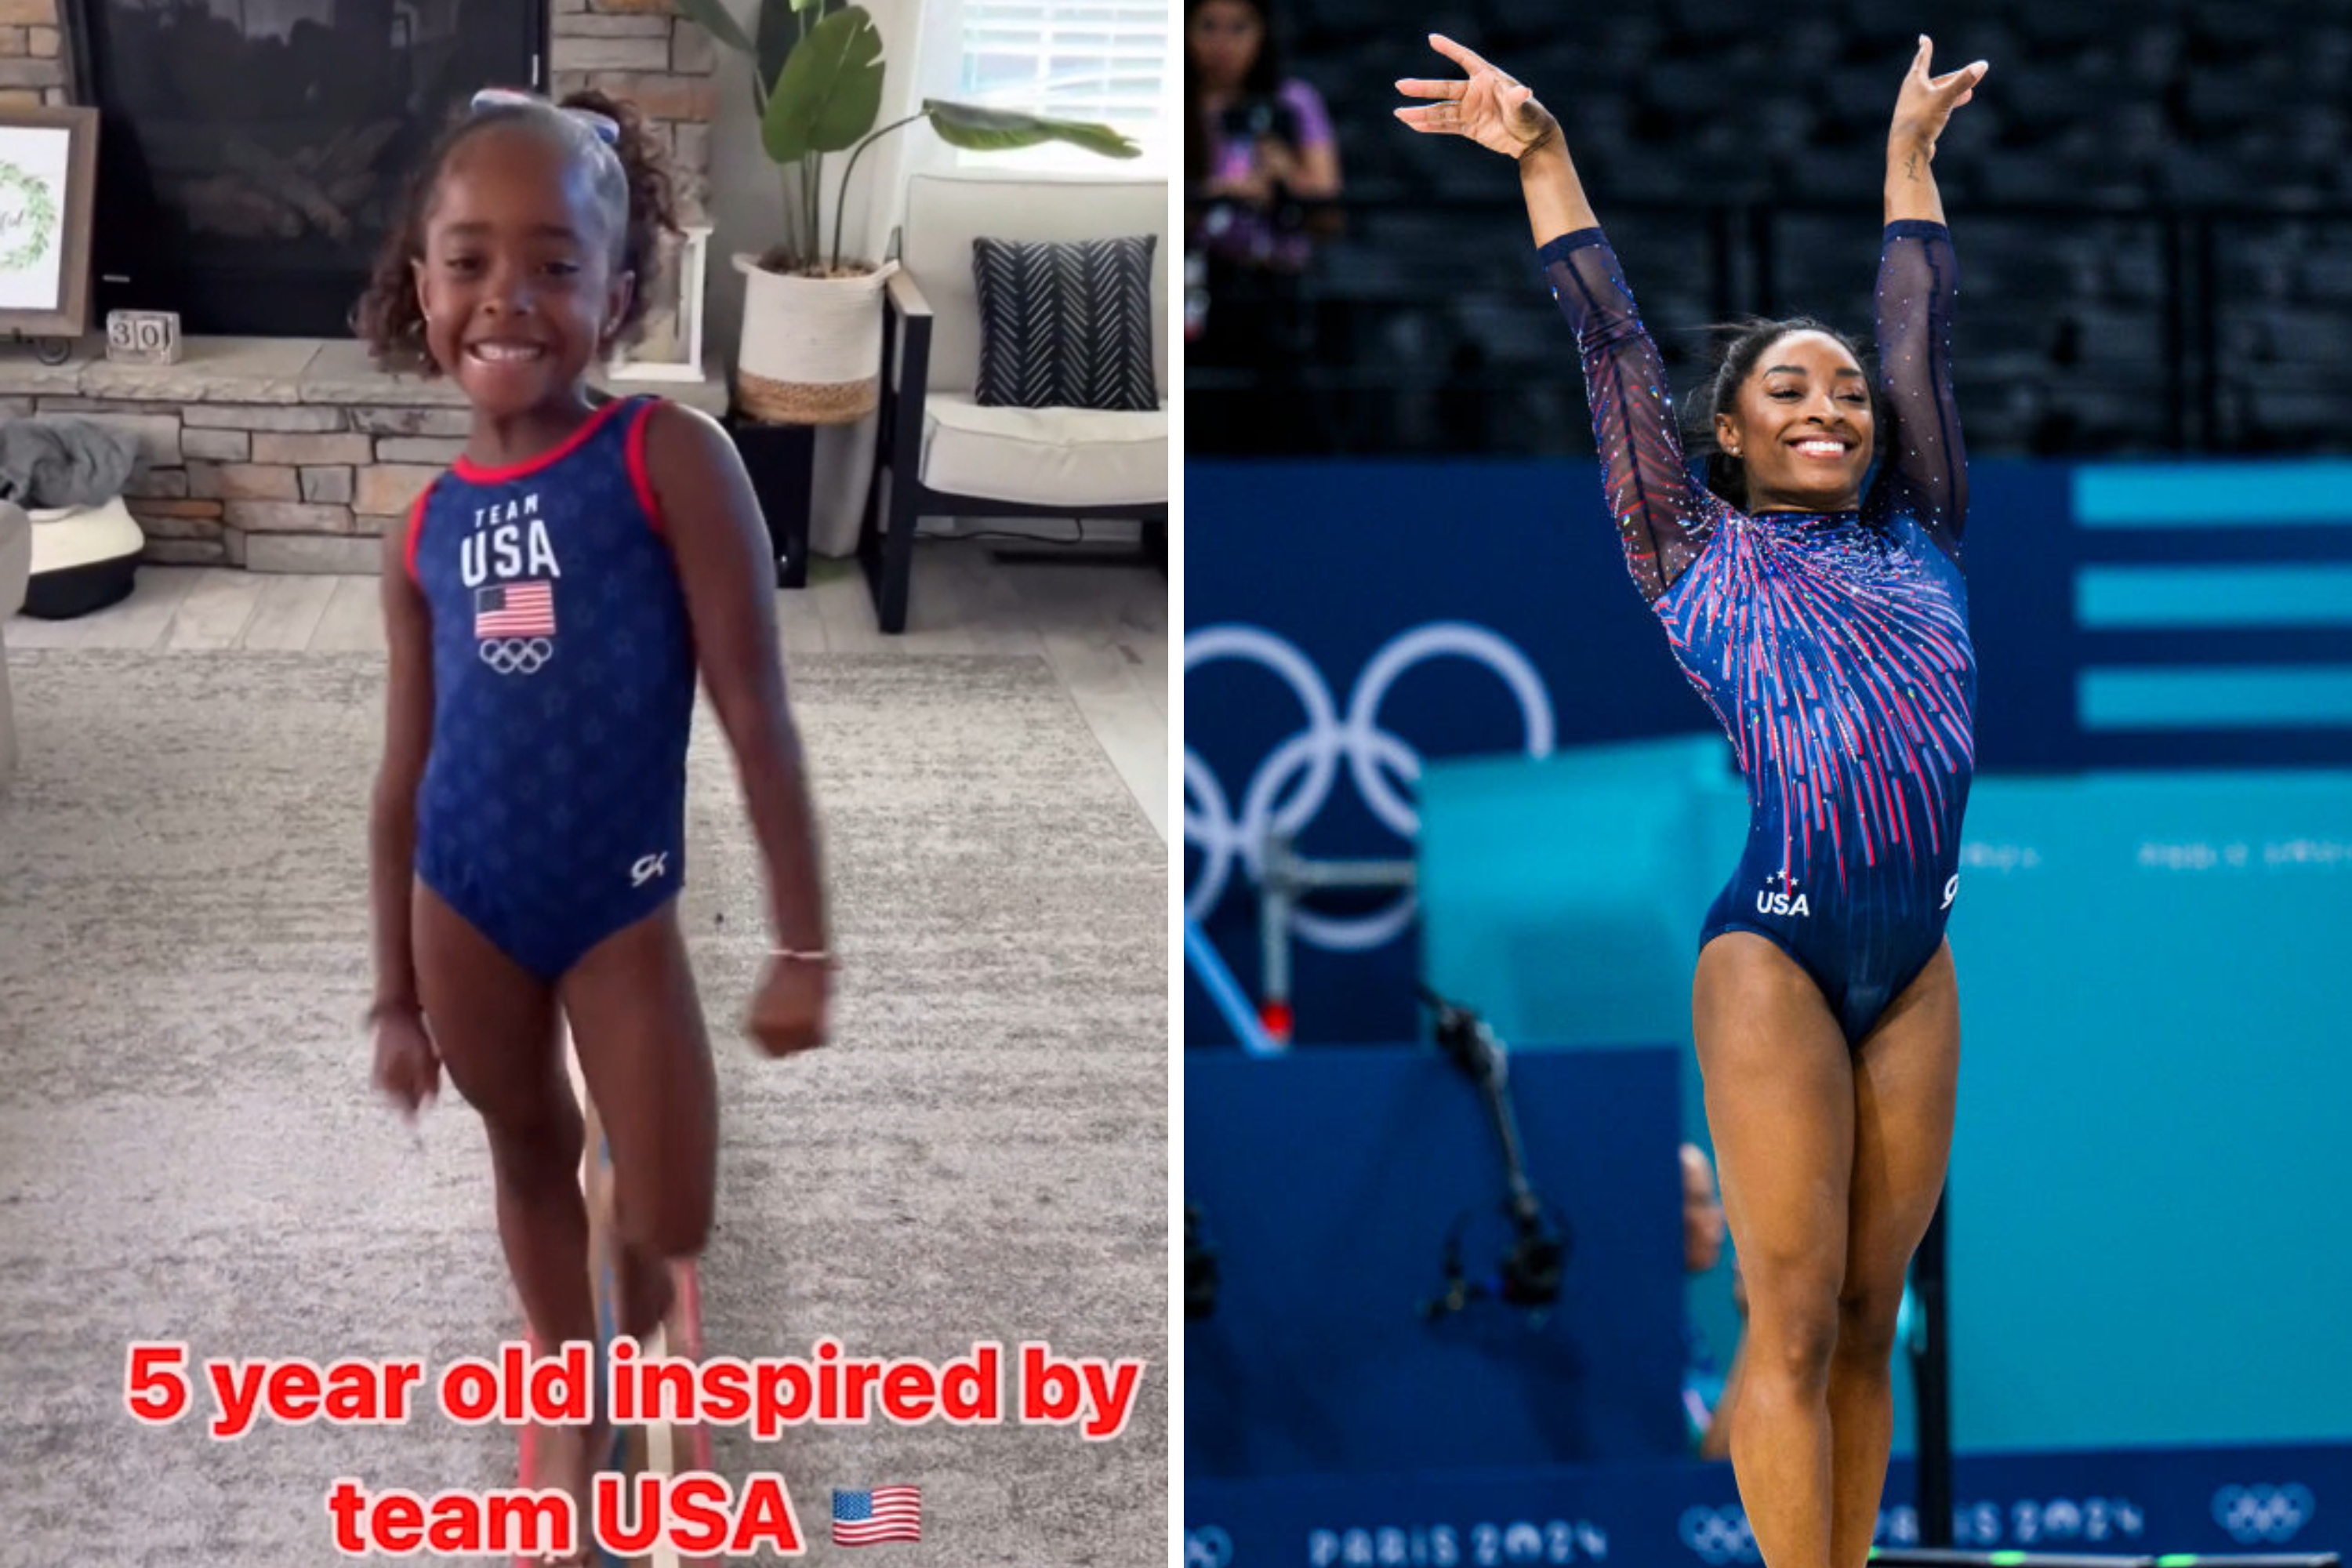 Simone Biles praises 5-year-old gymnast inspired by team USA—"Get it girl!"